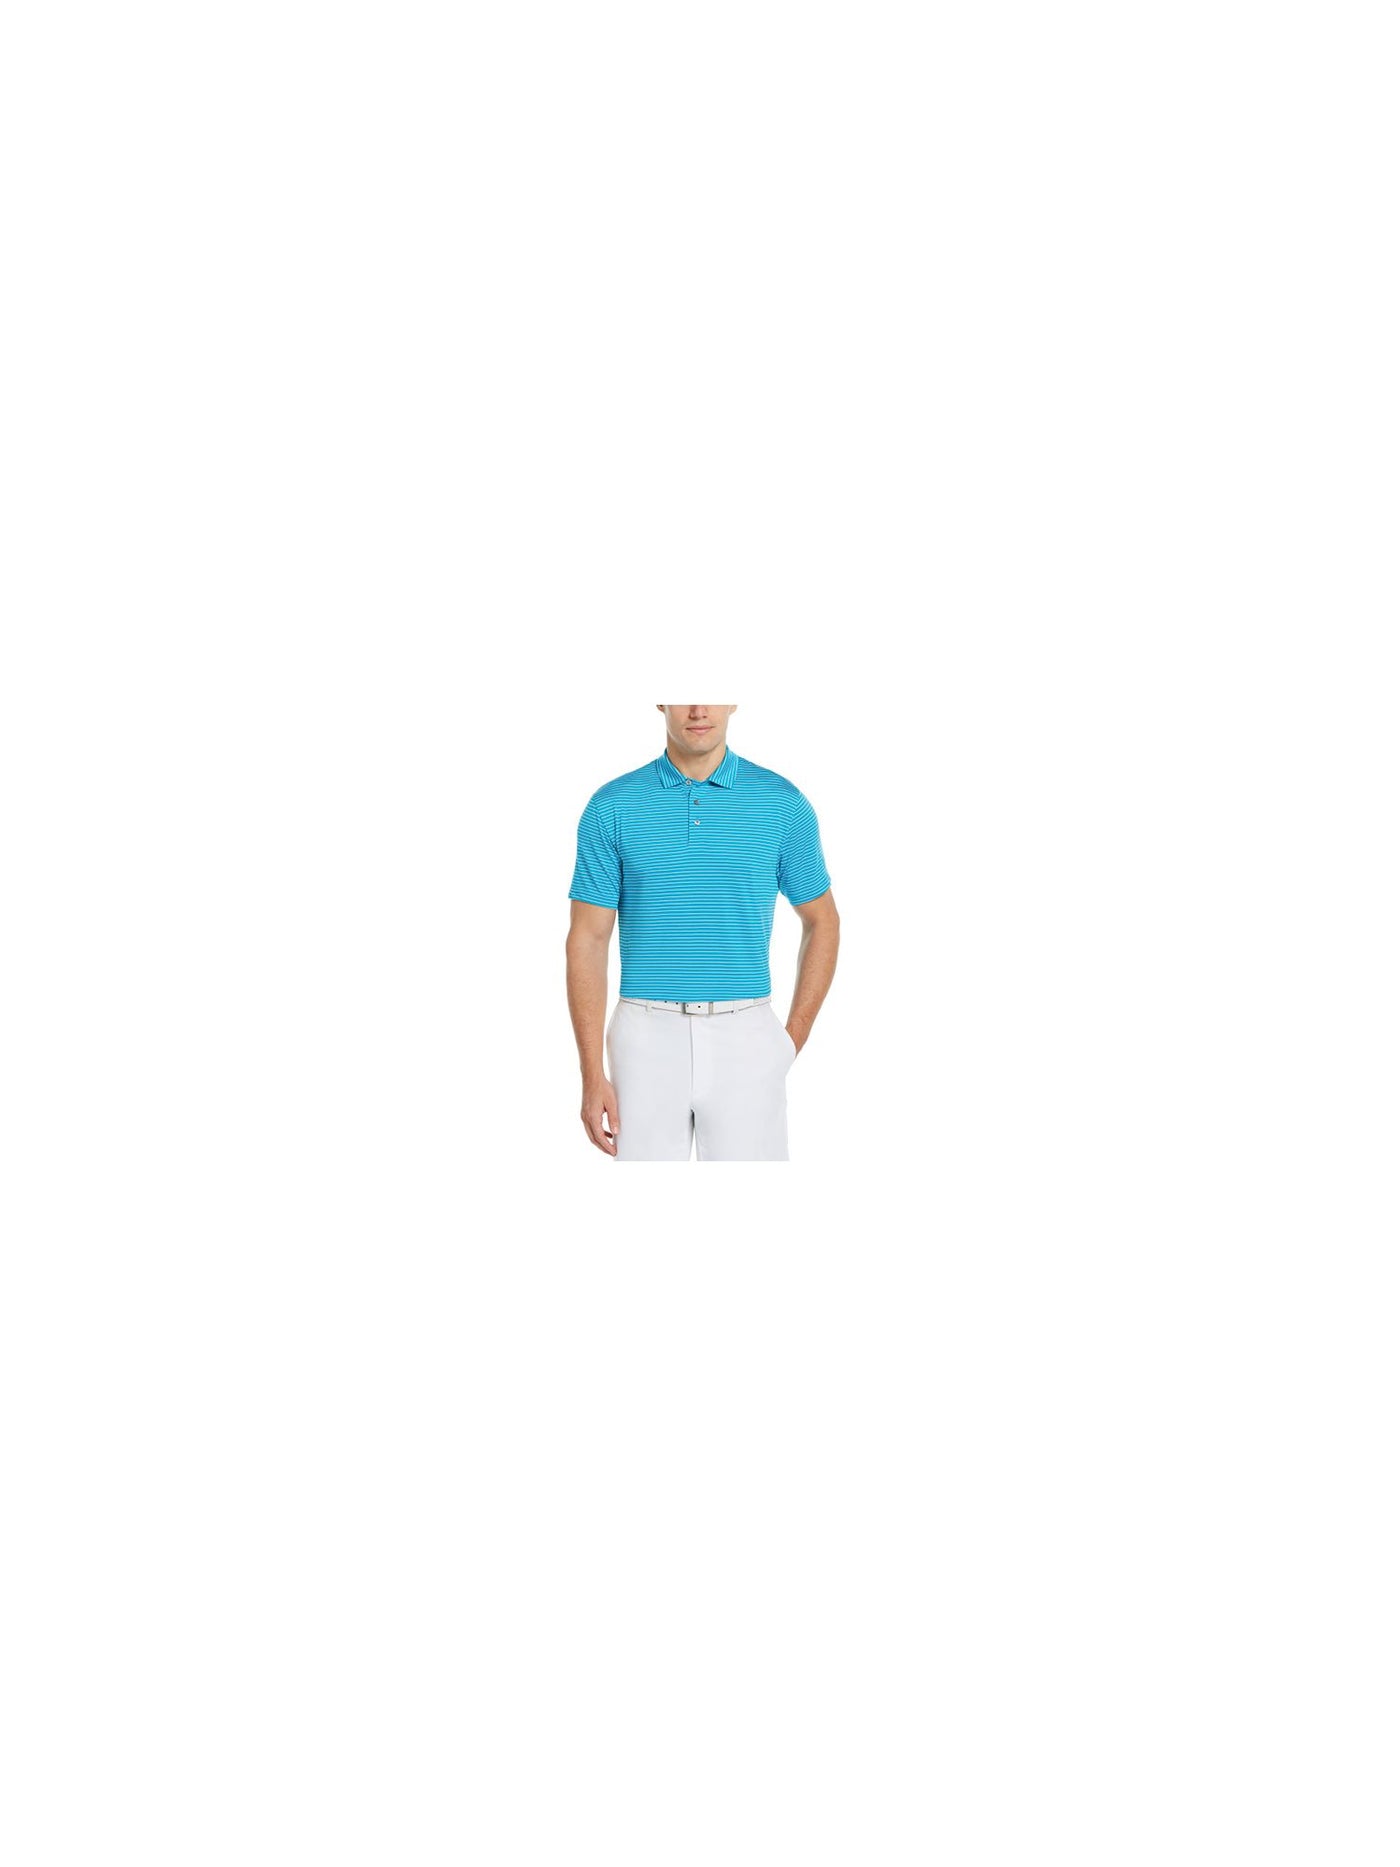 HYBRID APPAREL Mens Turquoise Striped Athletic Fit Moisture Wicking Polo S